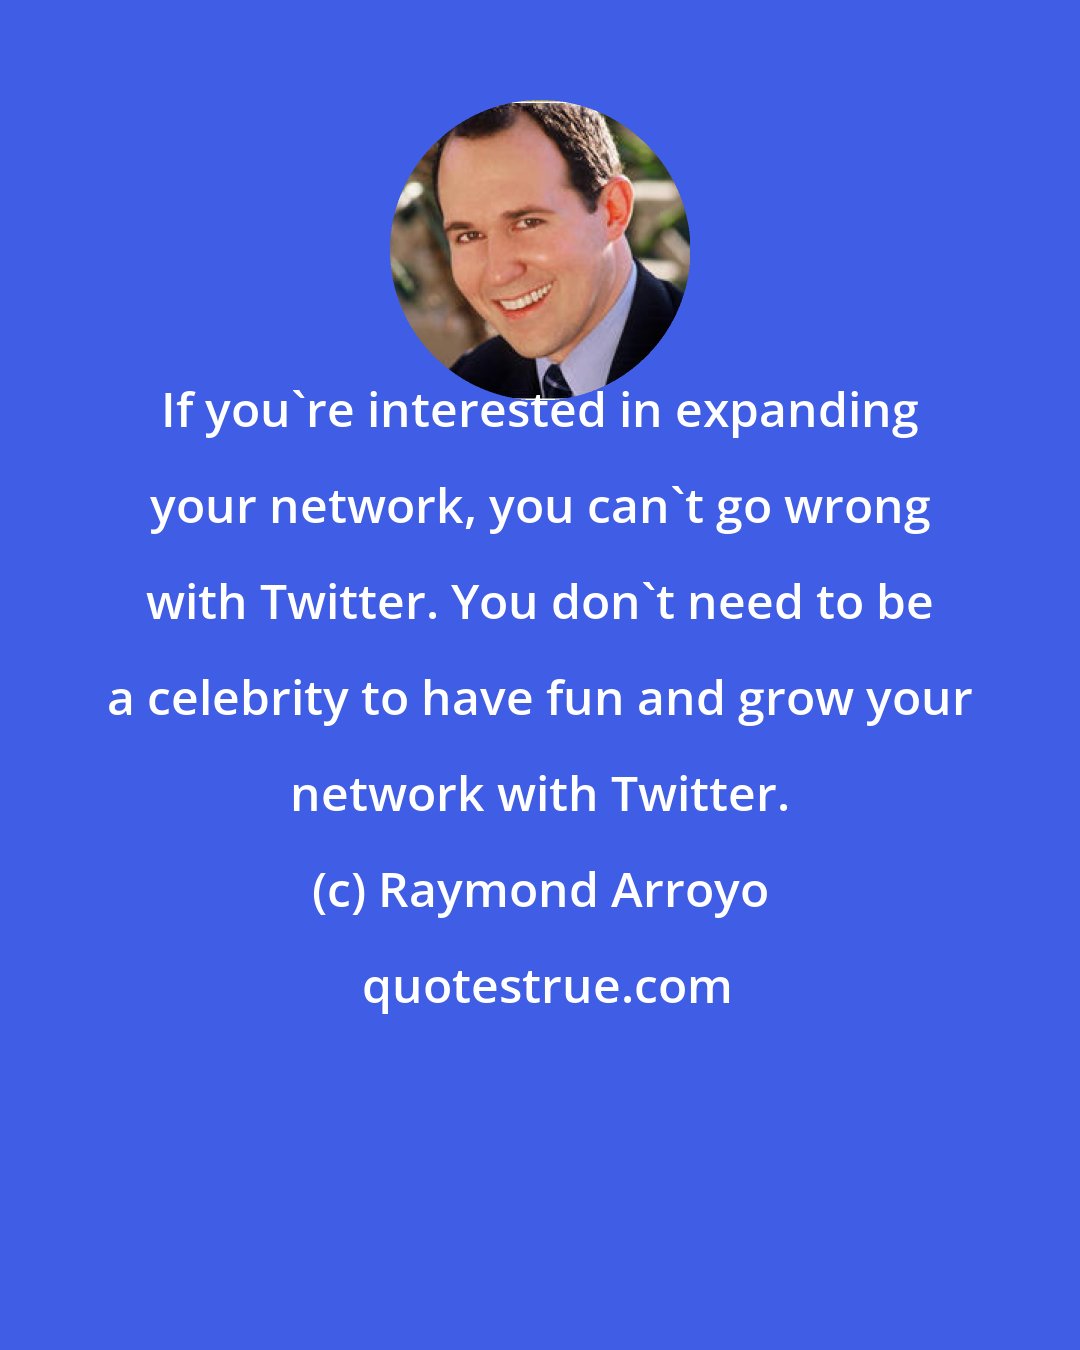 Raymond Arroyo: If you're interested in expanding your network, you can't go wrong with Twitter. You don't need to be a celebrity to have fun and grow your network with Twitter.